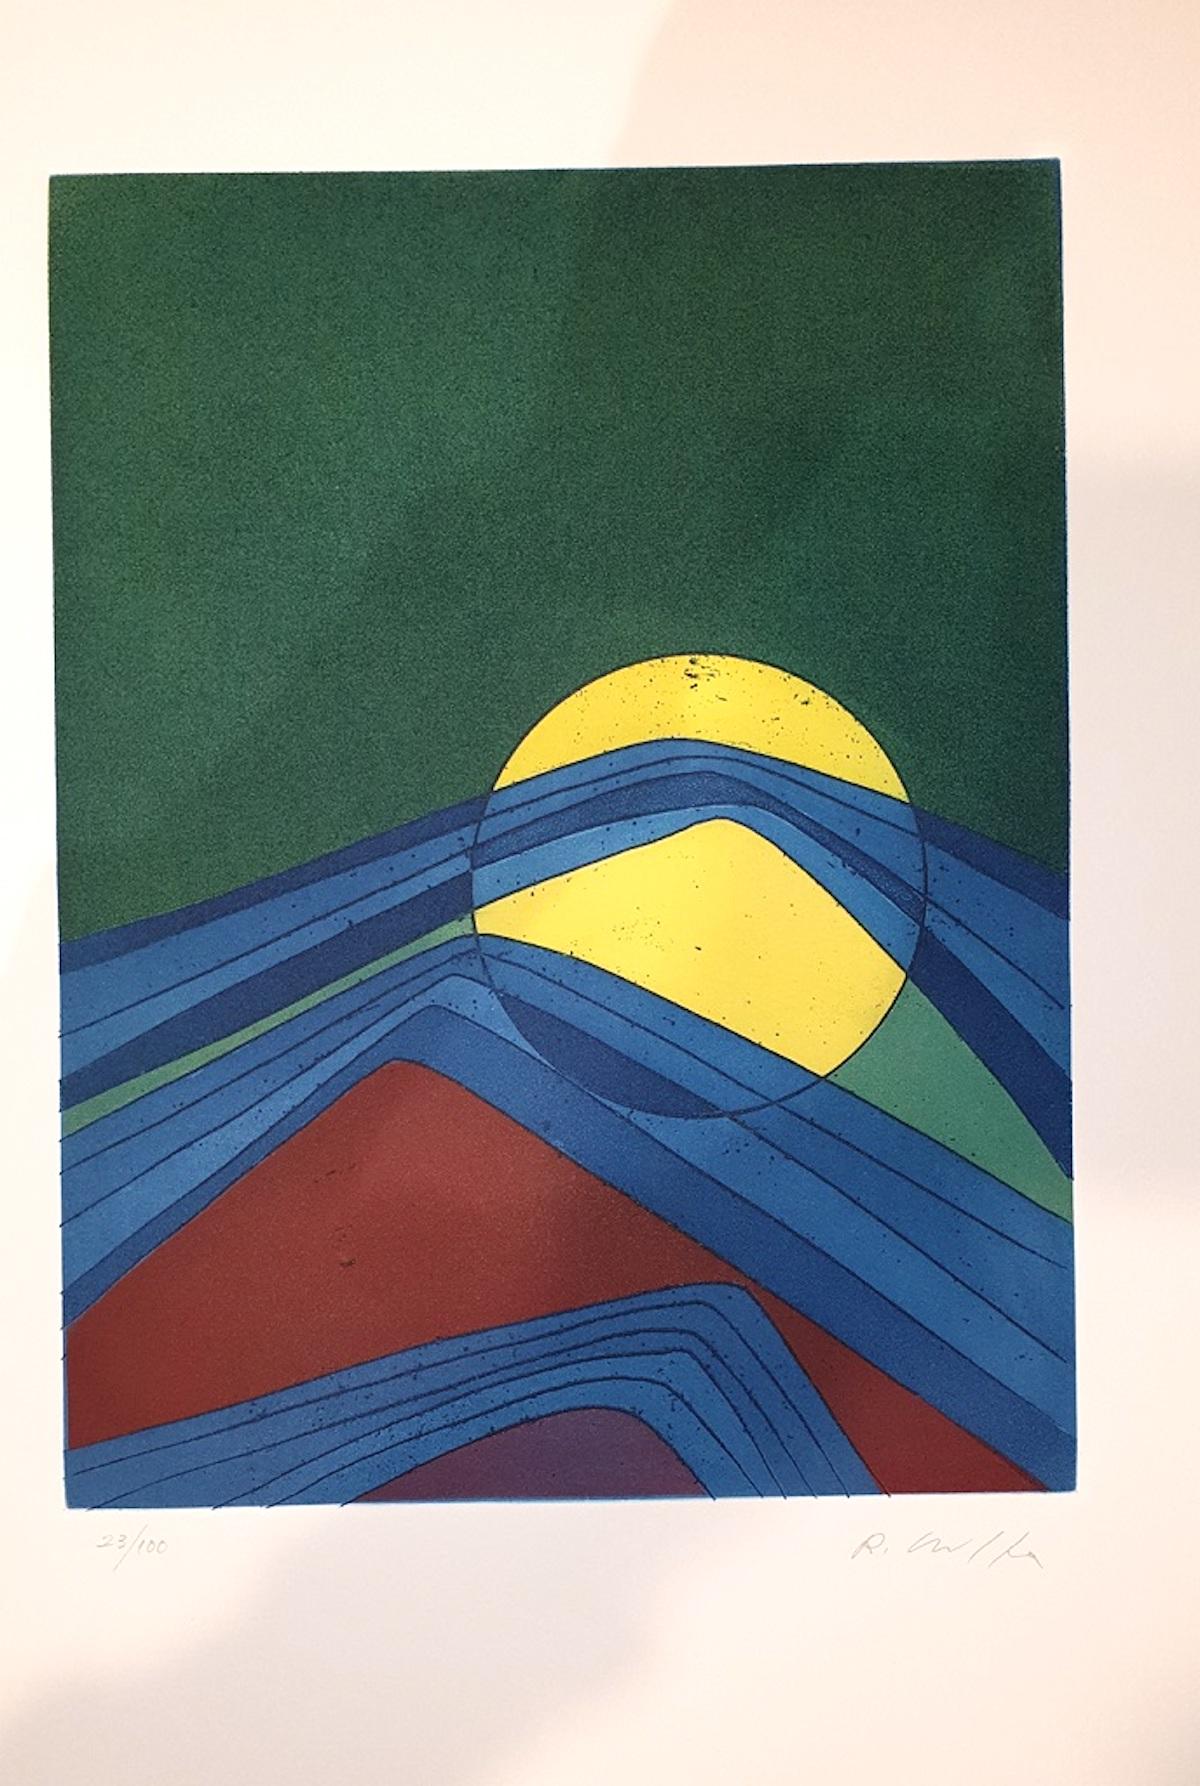 Roberto Crippa Abstract Print - Plate II from Suns/Landscapes - Etching by R. Crippa - 1971/72